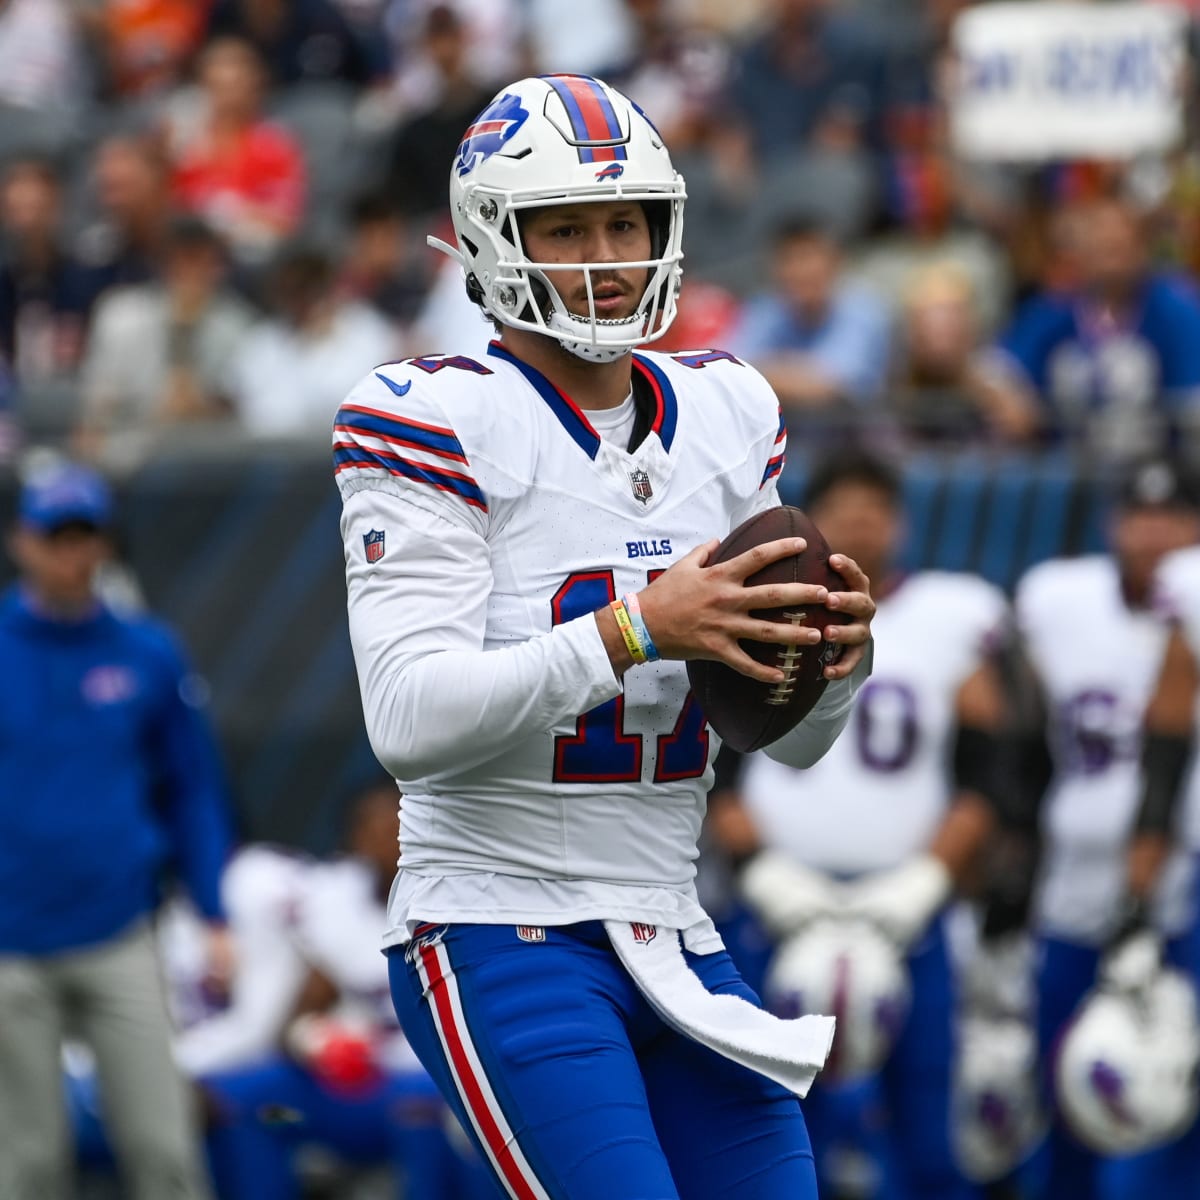 How to watch and stream Bills vs. Jets in NFL Week 1 - A to Z Sports